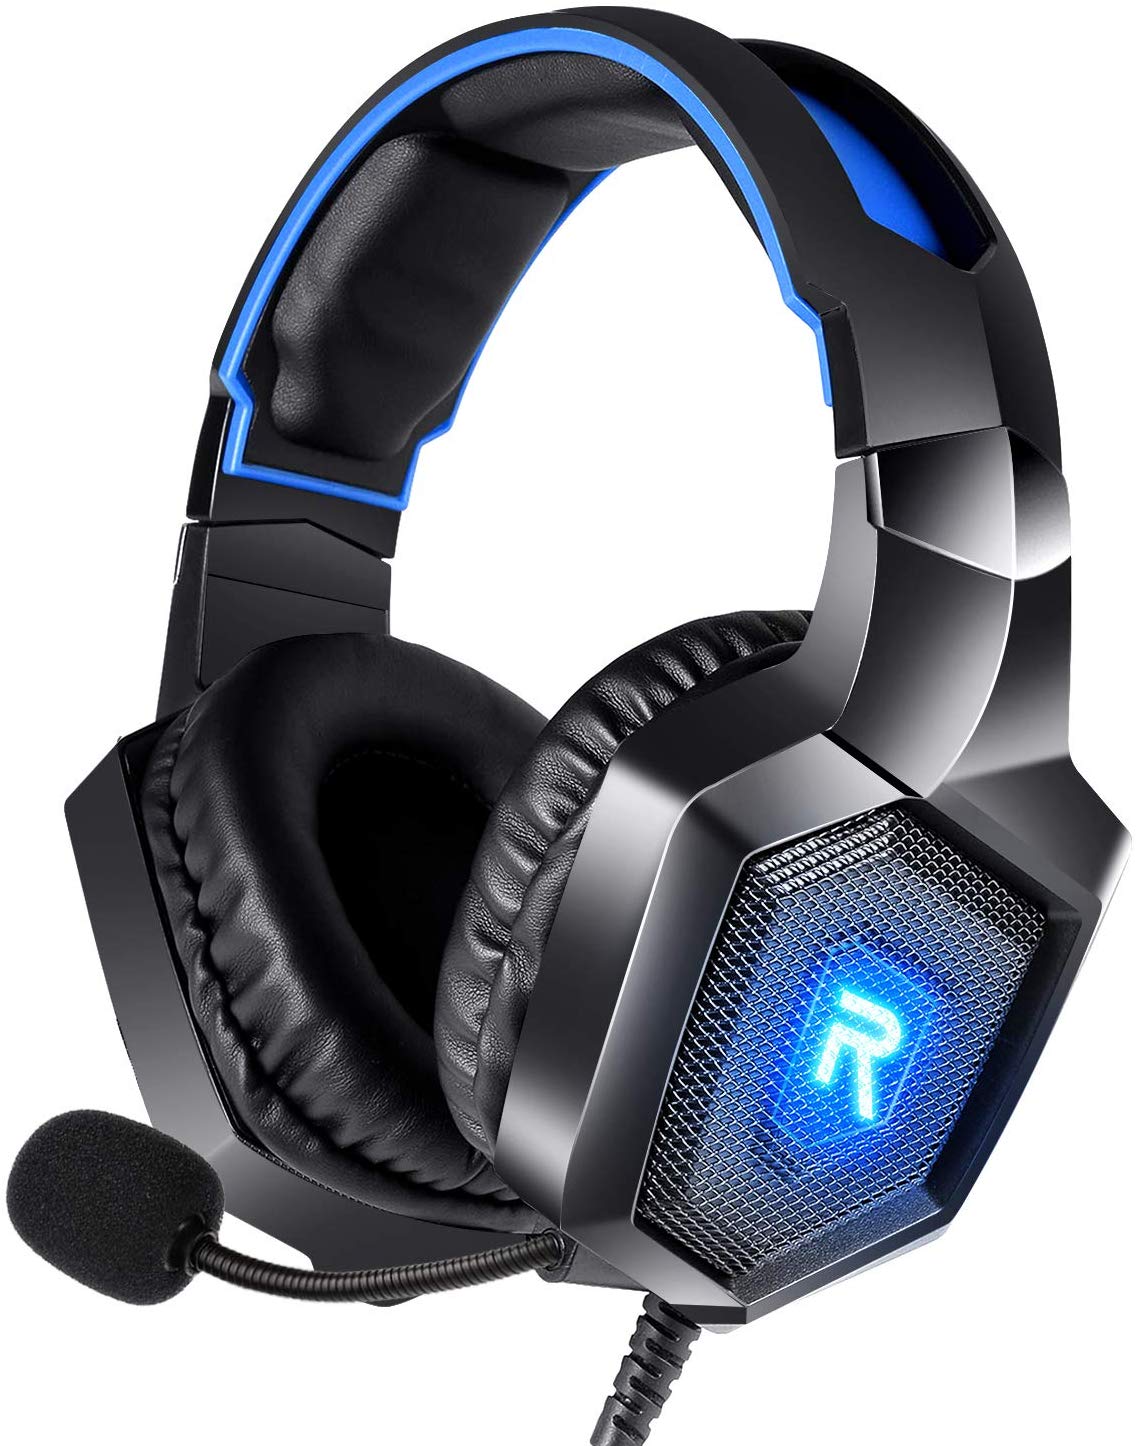 RUNMUS Gaming Headset PS4 Headset with 7.1 Surround Sound, Xbox One Headset w/ Noise Canceling Microphone & LED Light, Compatible with PS4, Xbox One,...